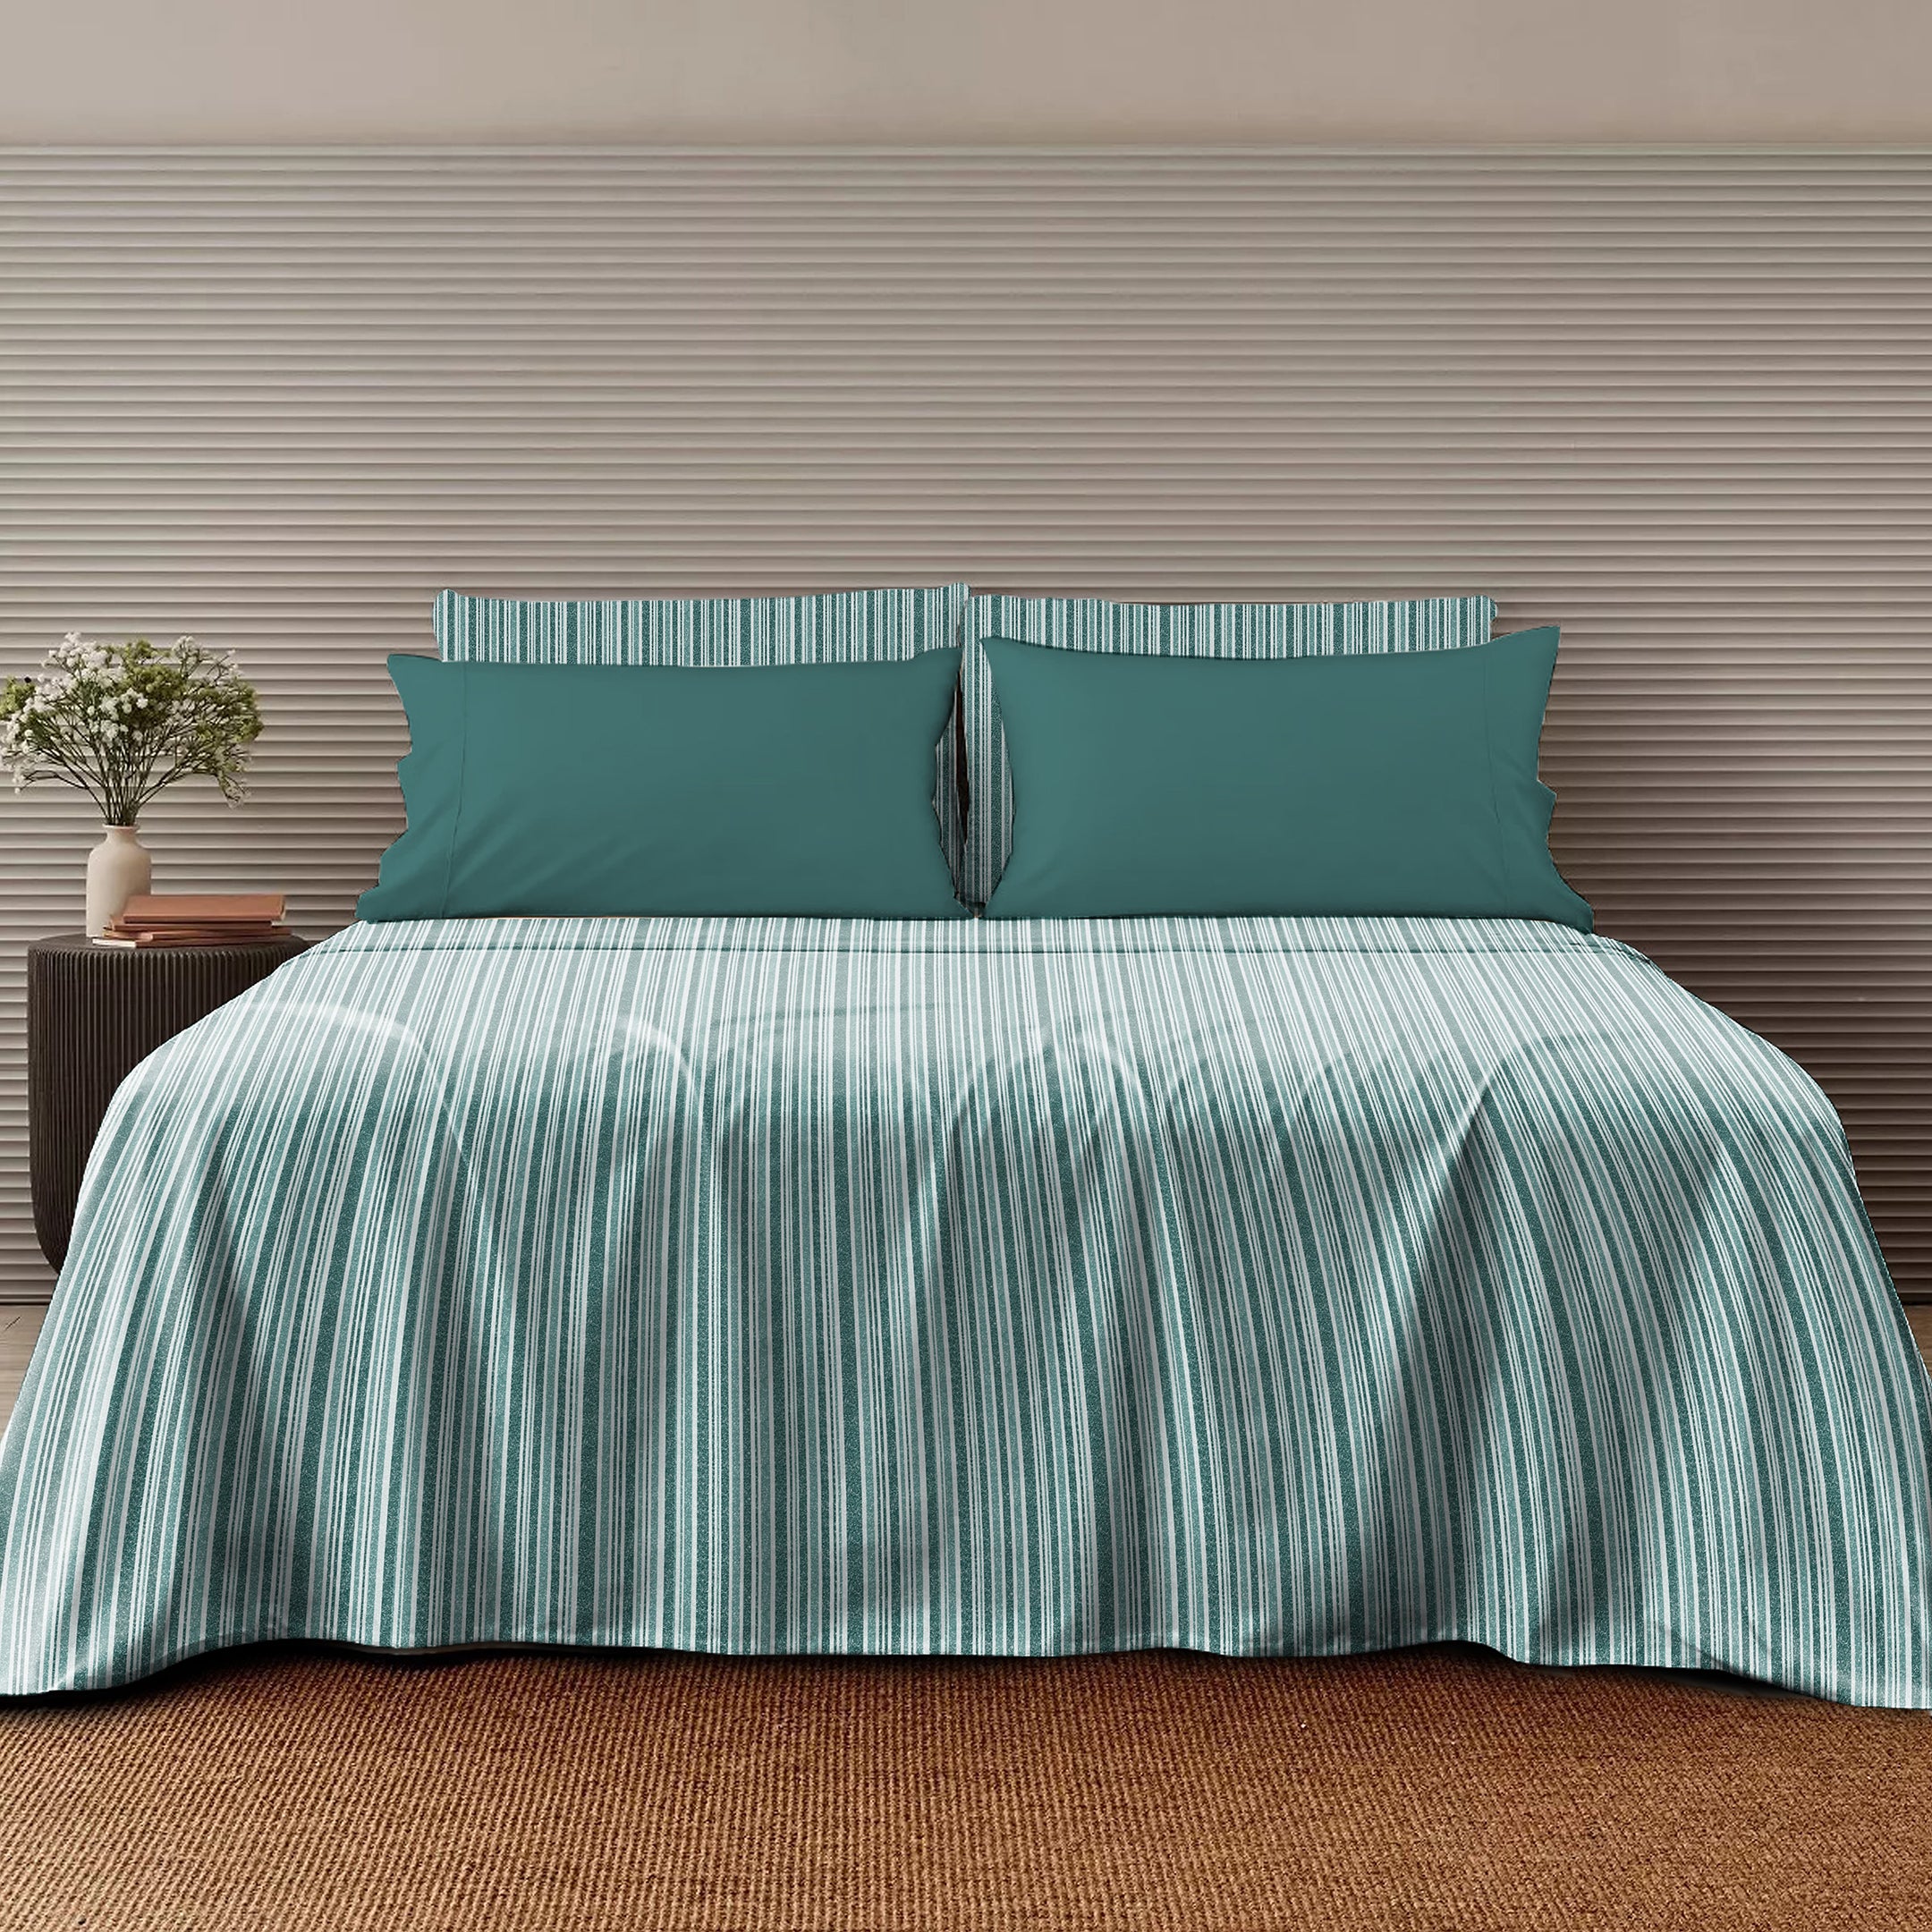 Jodhpur Stripe Bedsheet for Double Bed with 2 PillowCovers King Size (104" X 90") Teal